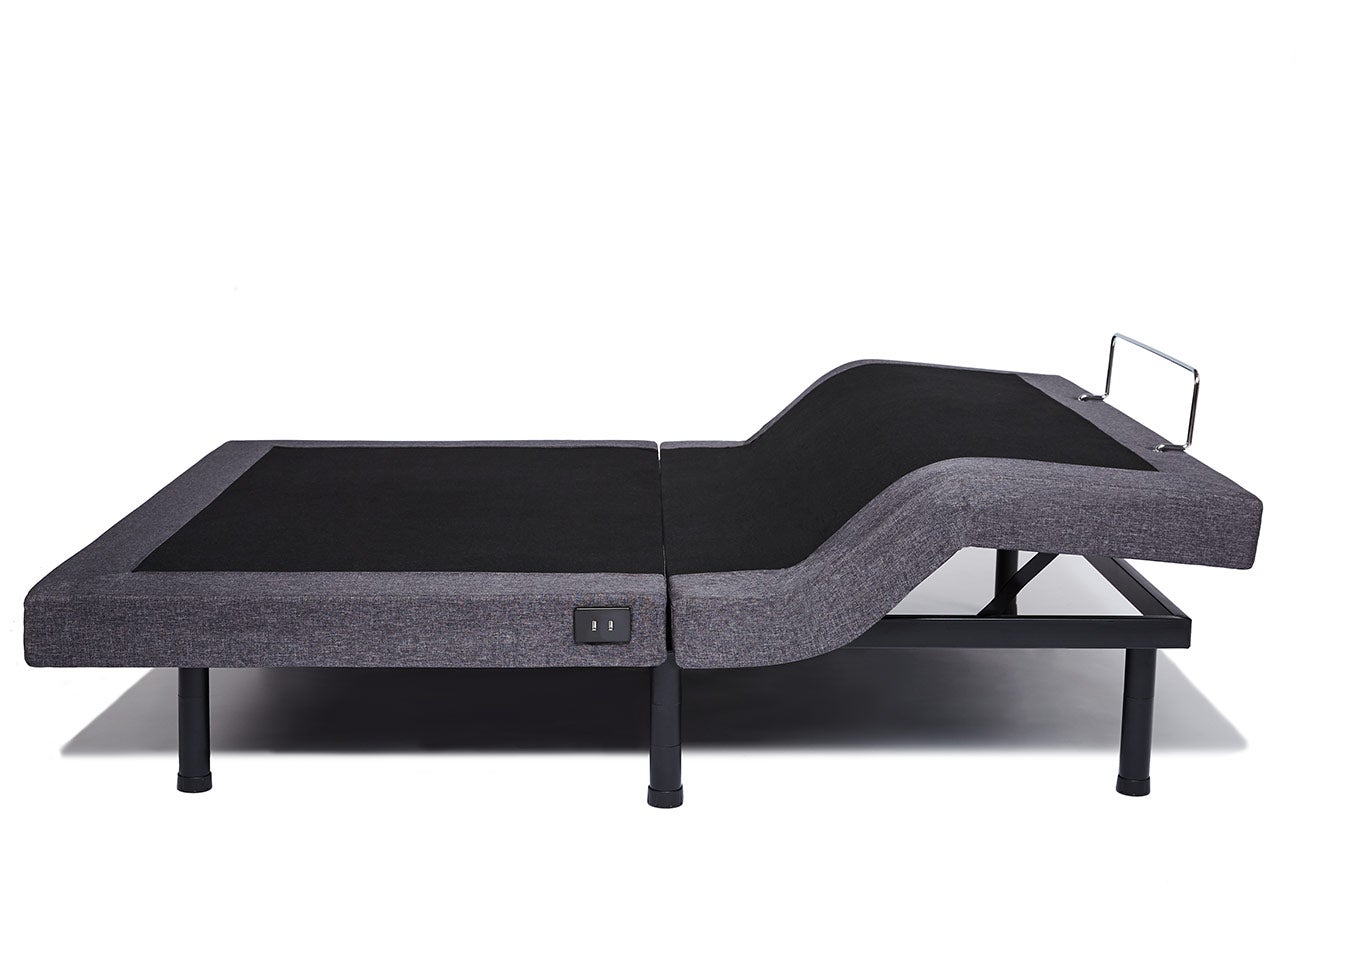 nectar adjustable base with sleep number bed